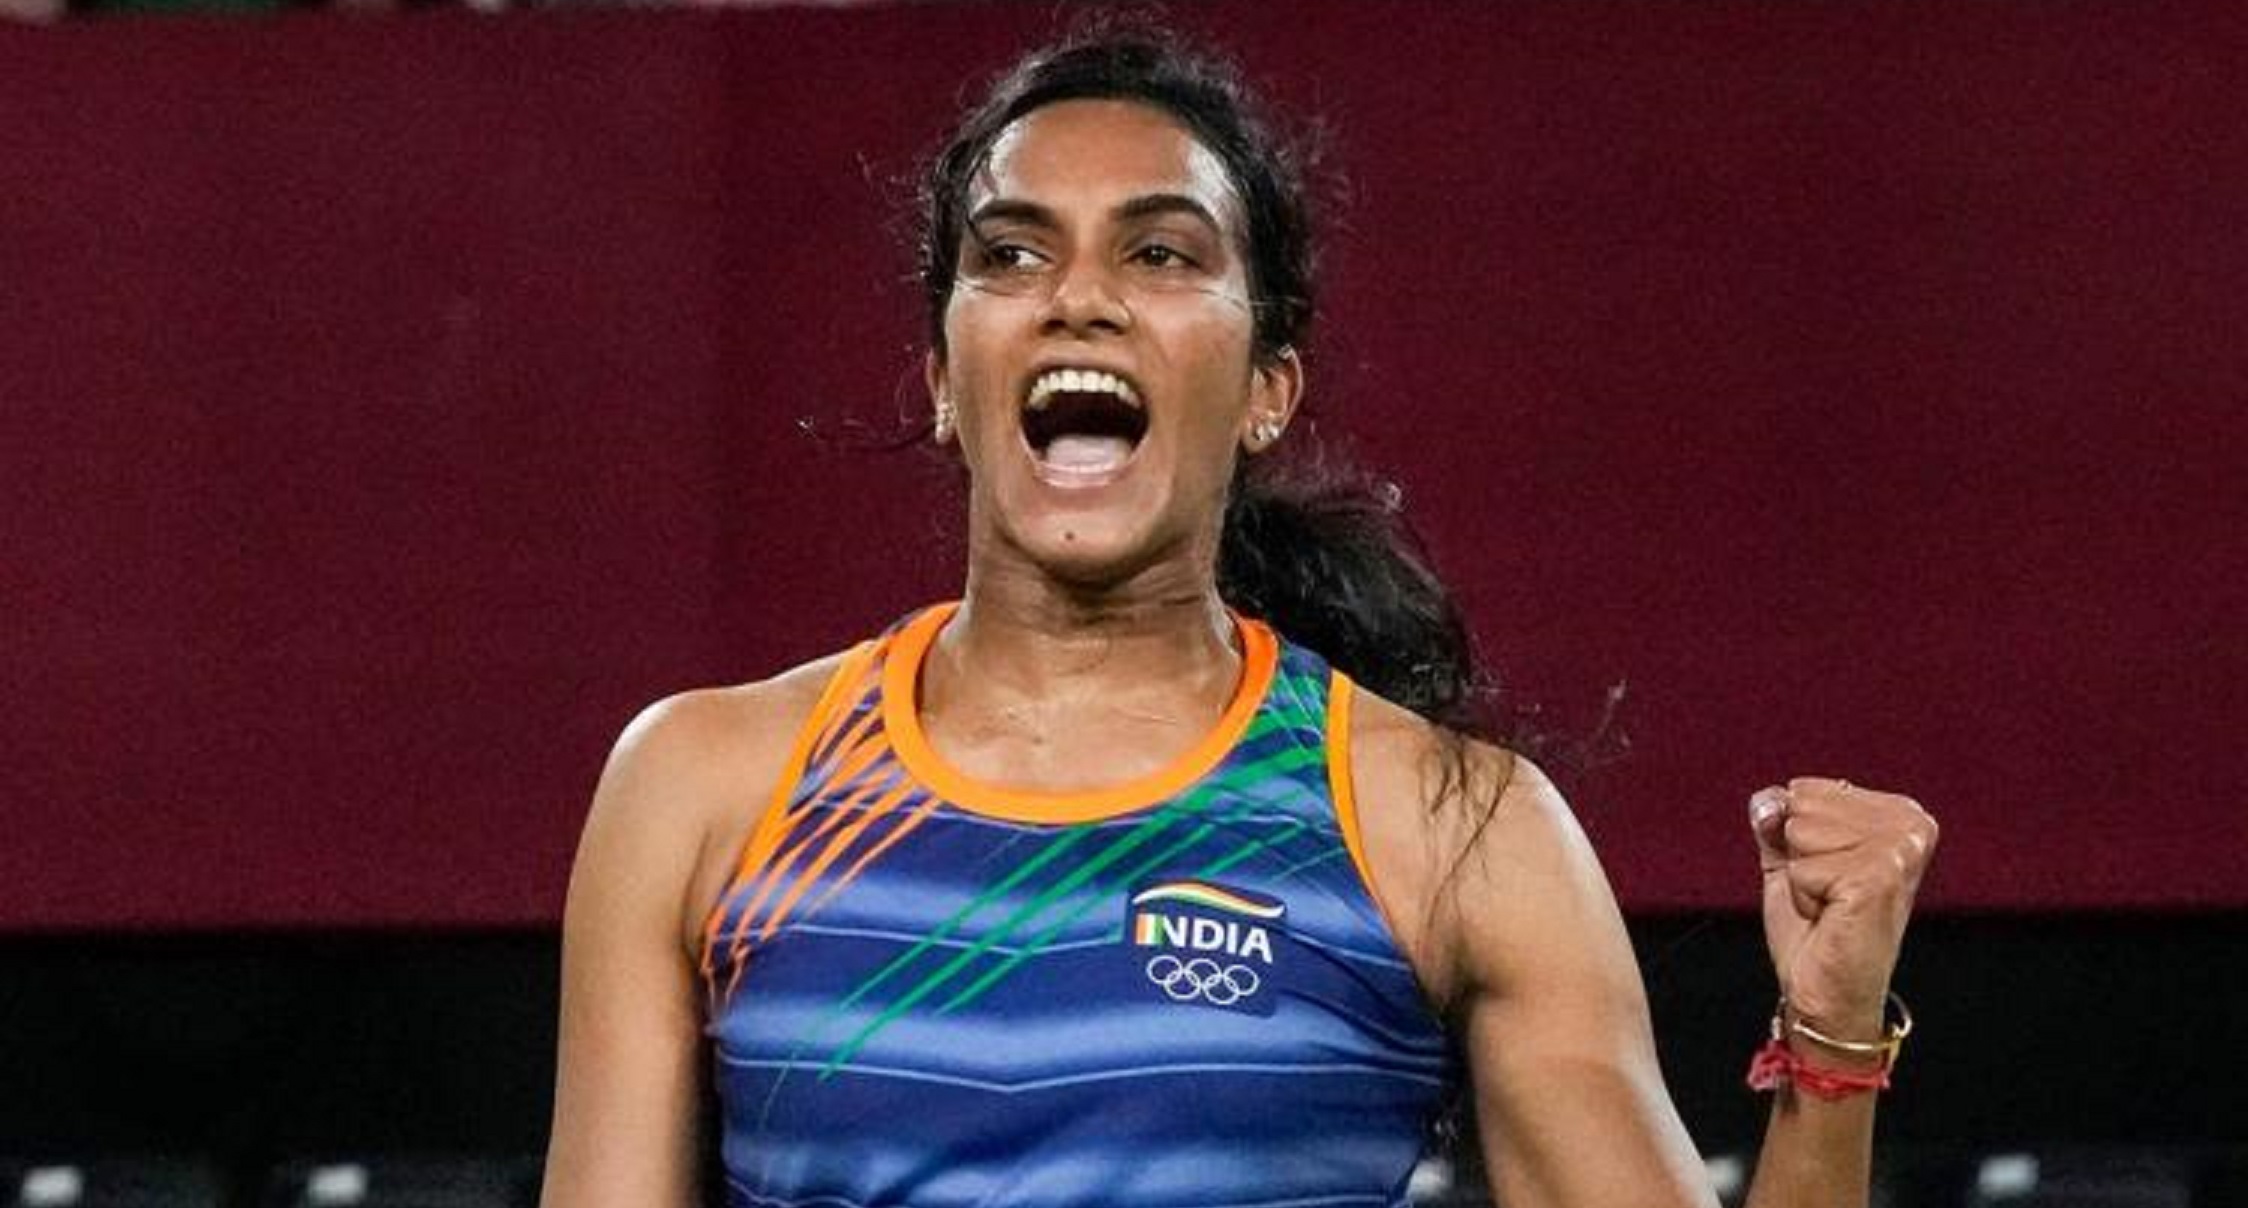 Olympics: P.V. Sindhu Earns India Another Medal, PM Modi, President Kovind & More Congratulate